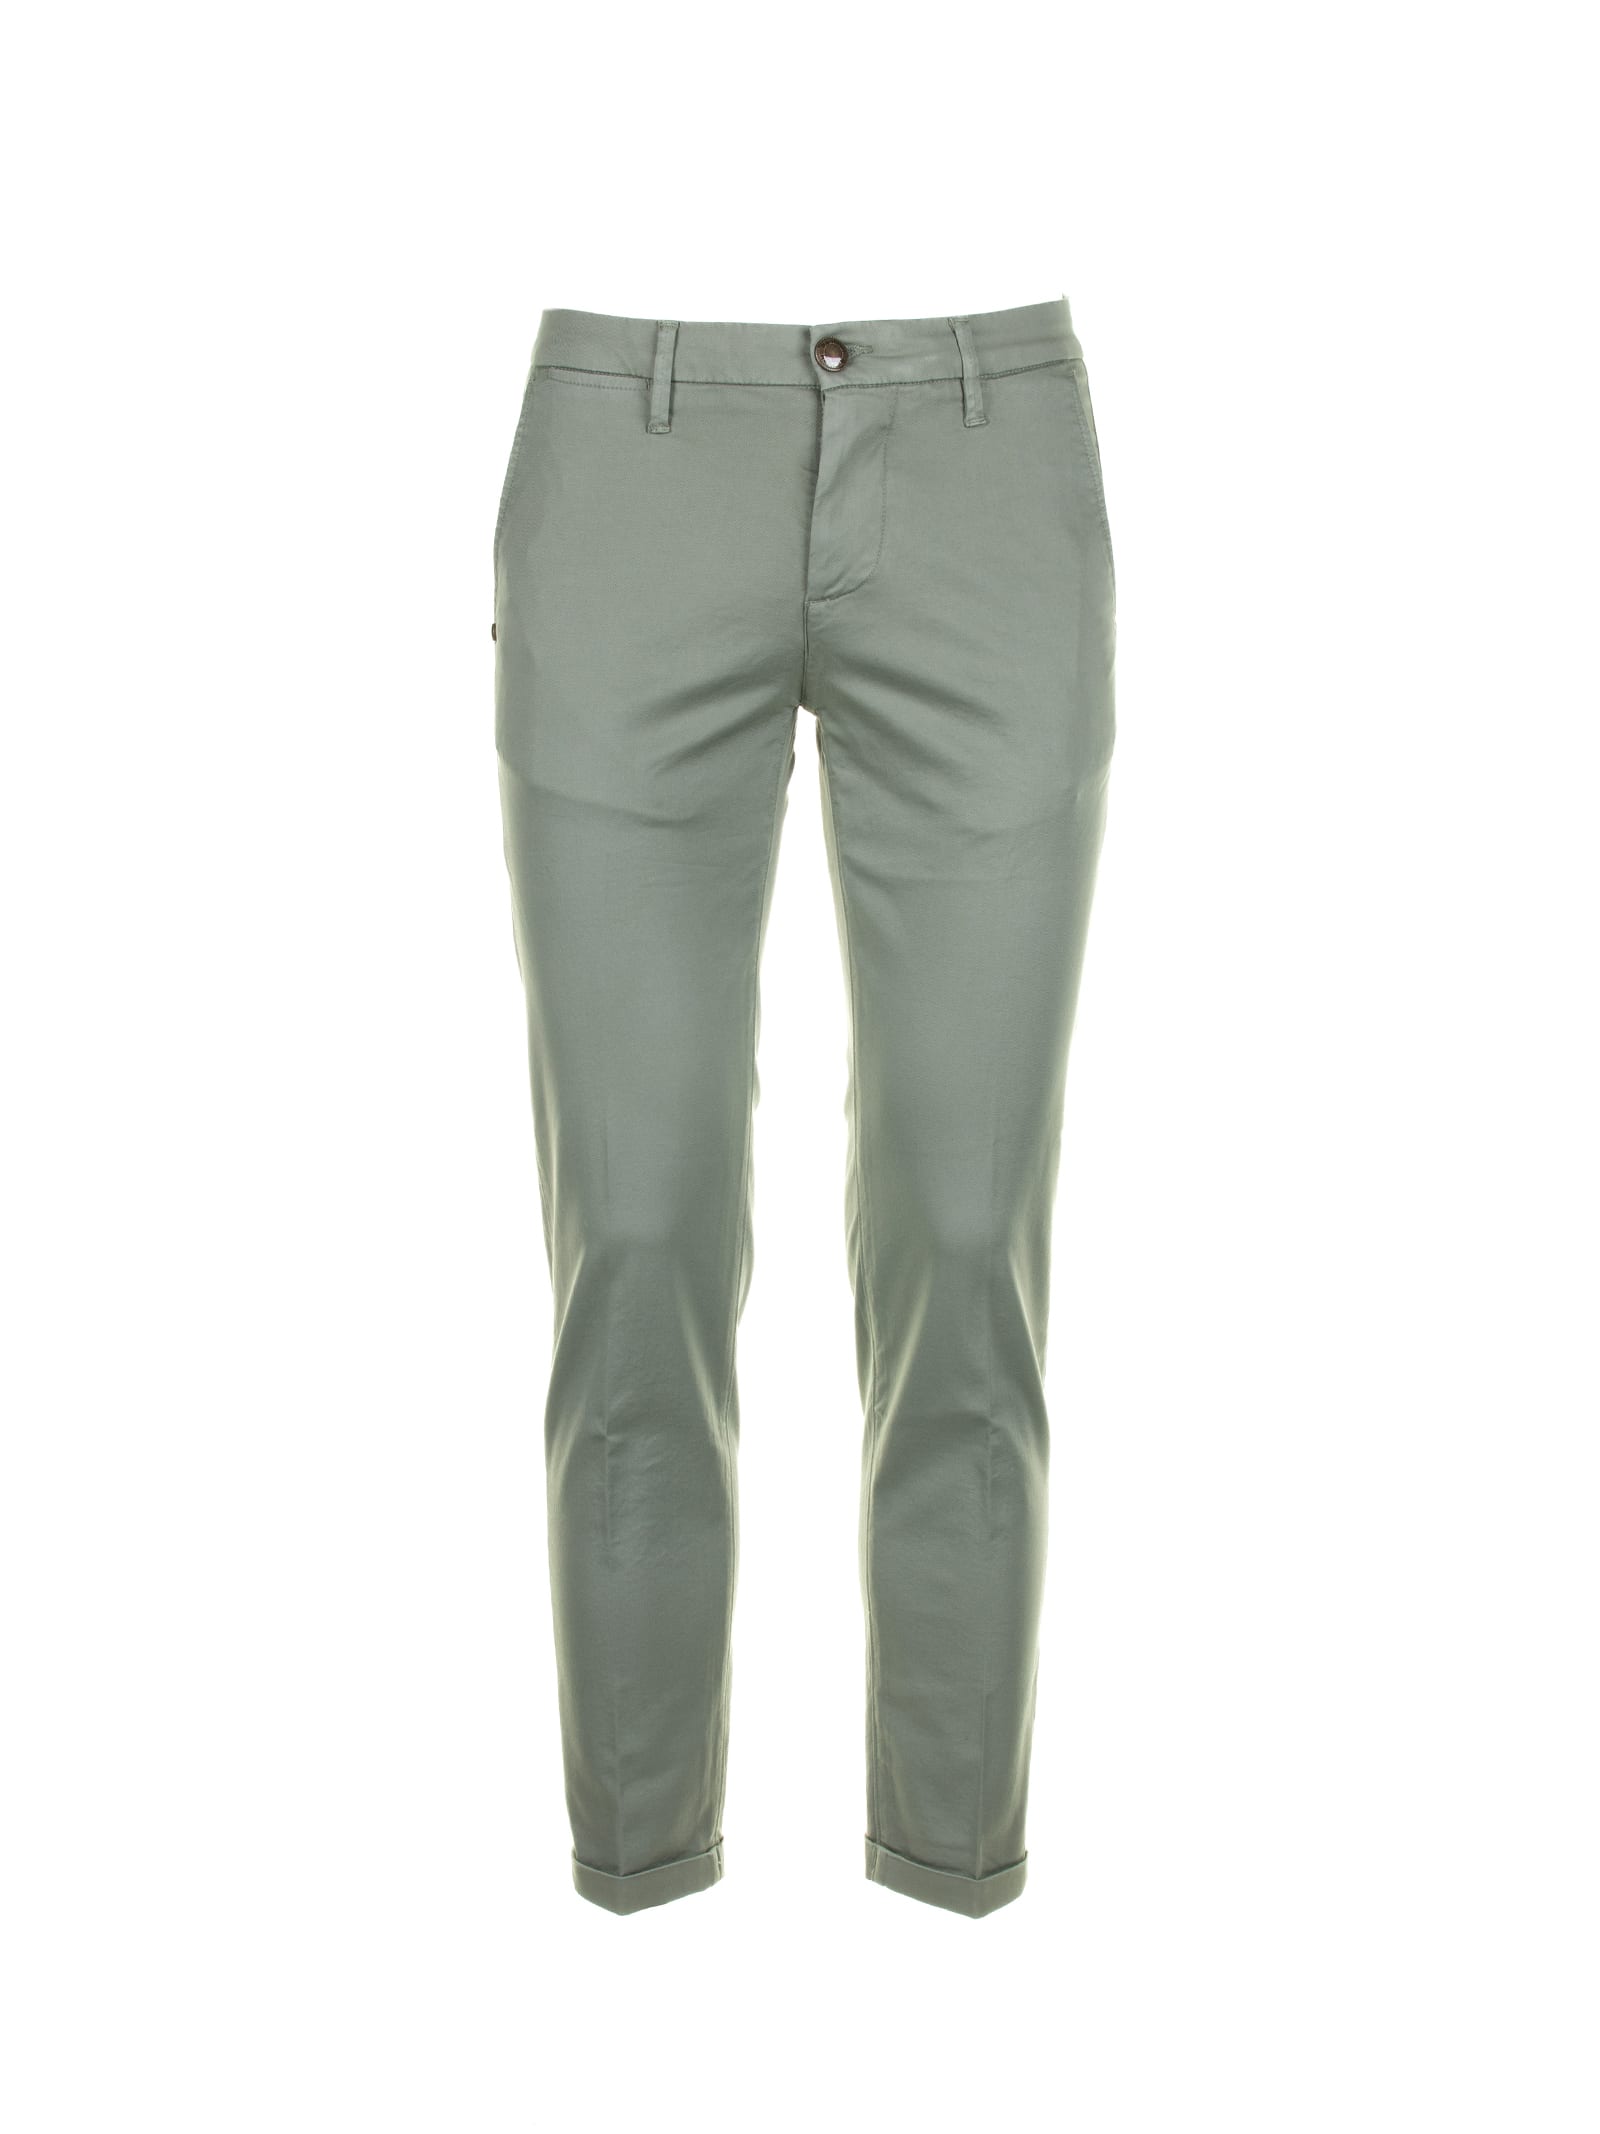 Re-HasH Sage Green Chino Trousers